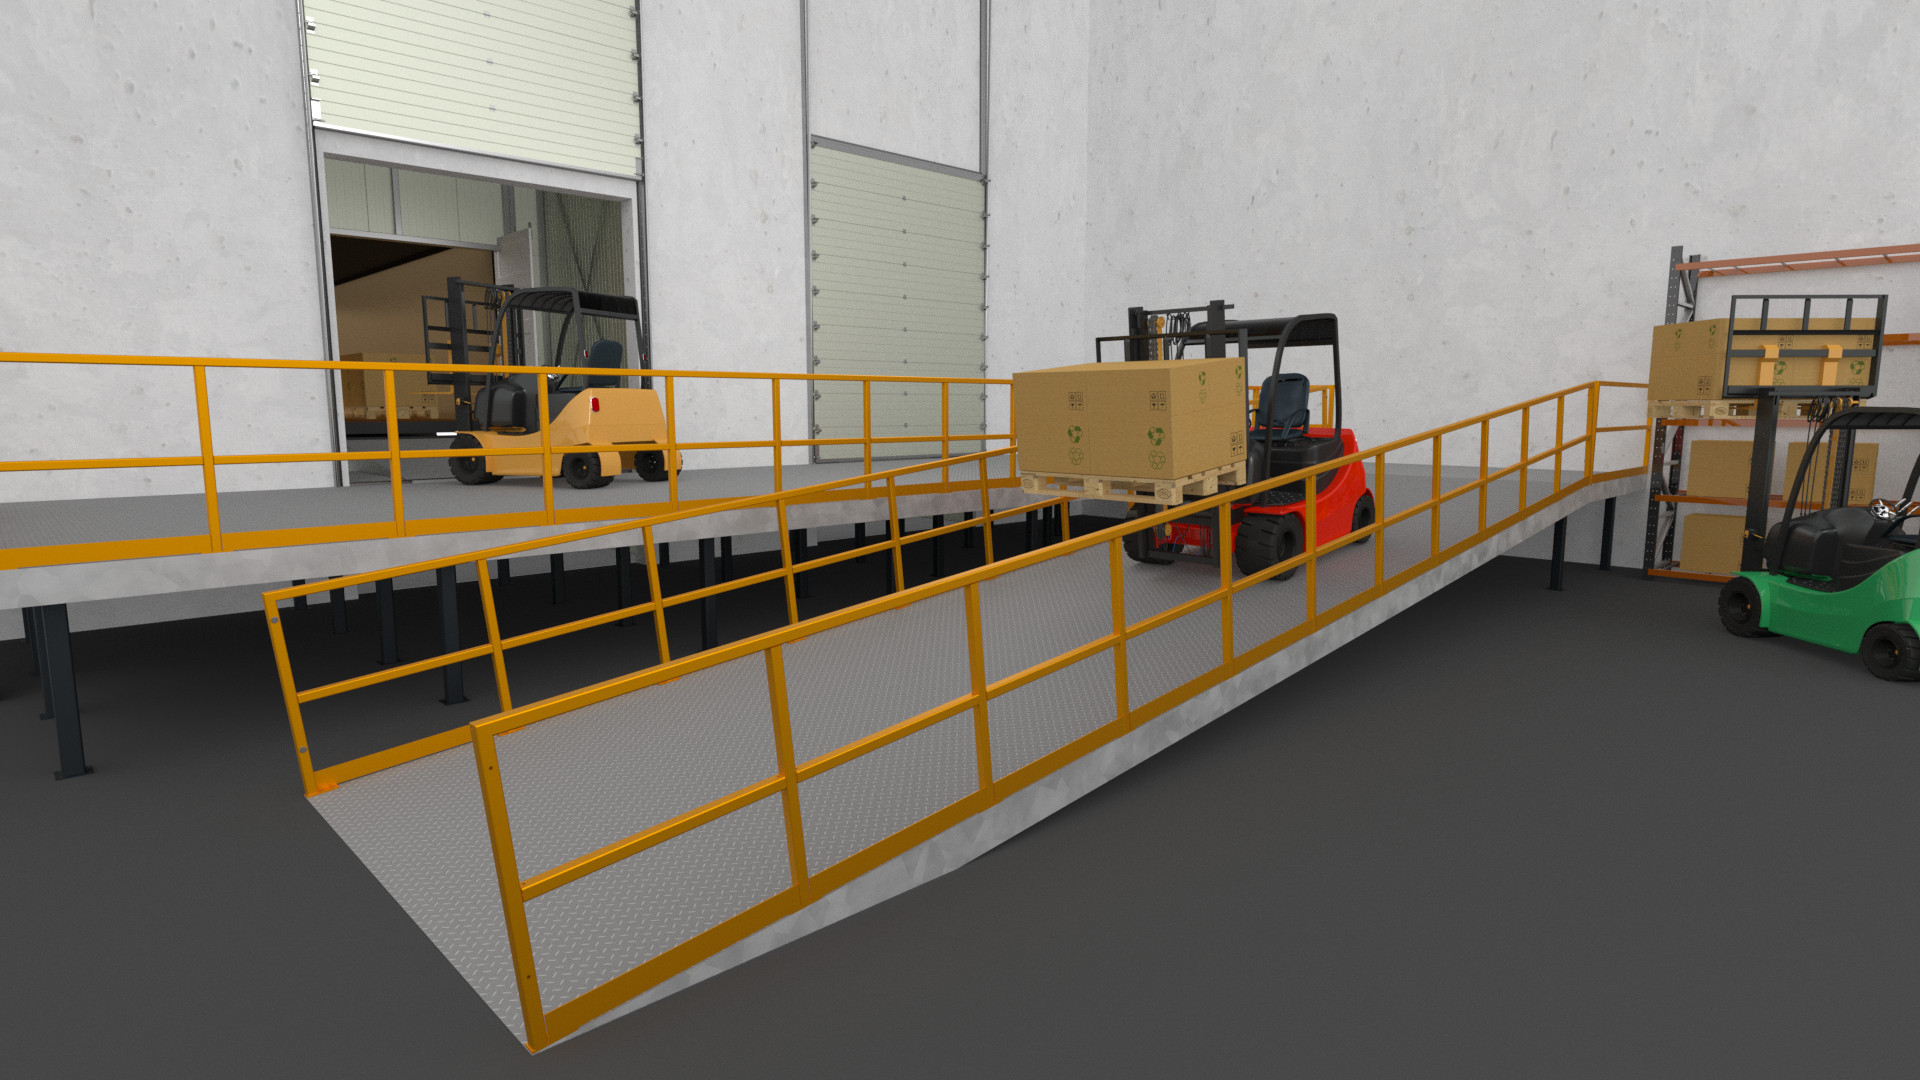 Loading with platform - also with forklift truck